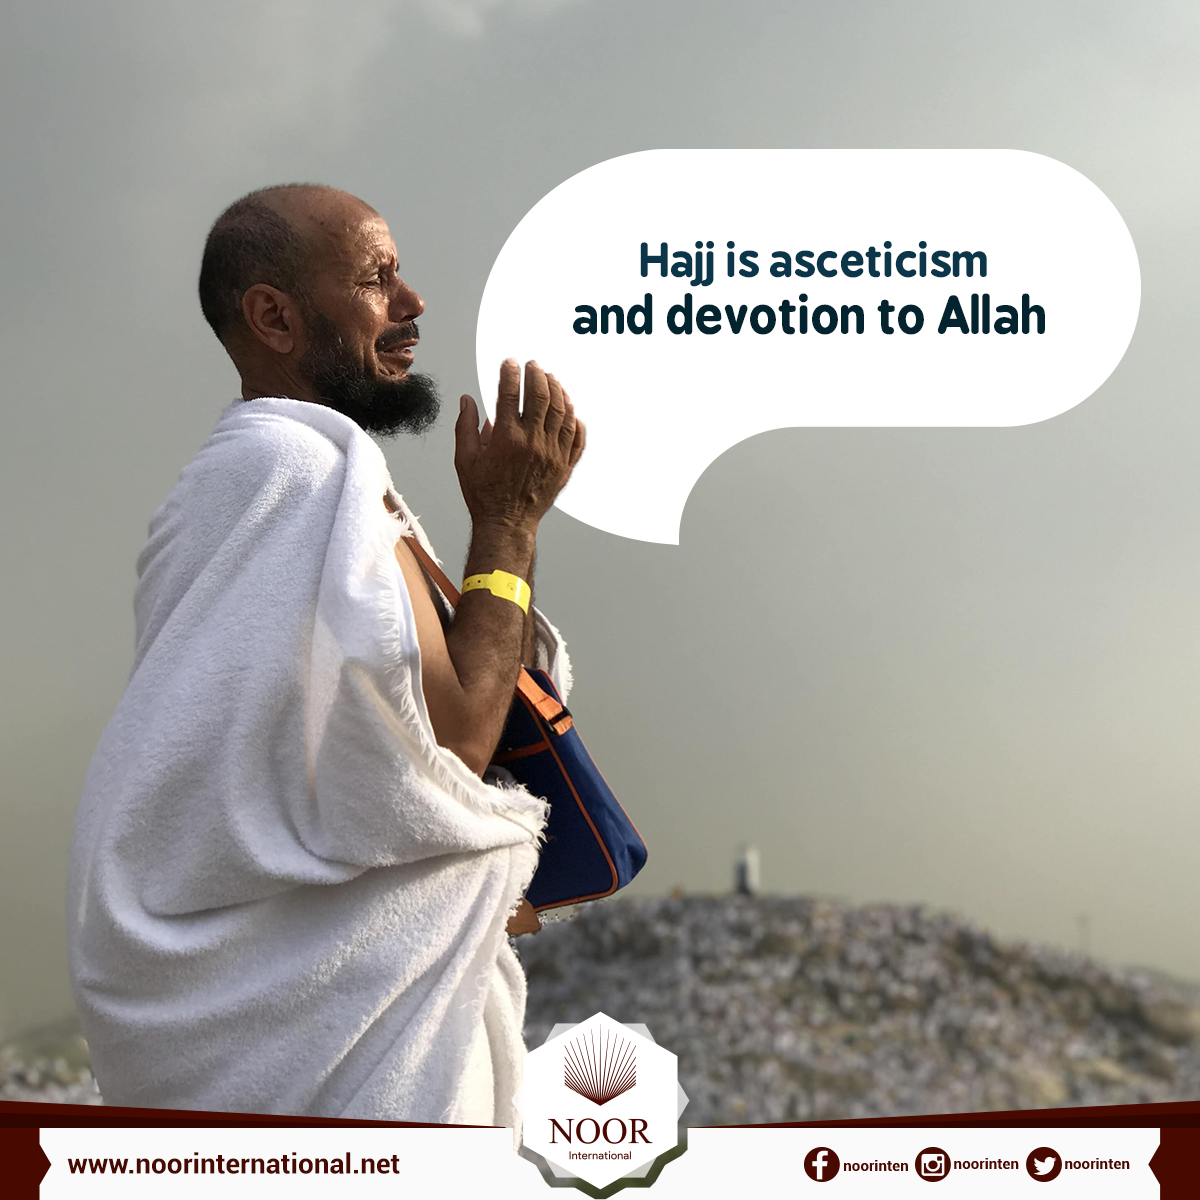 Hajj is asceticism and devotion to Allah